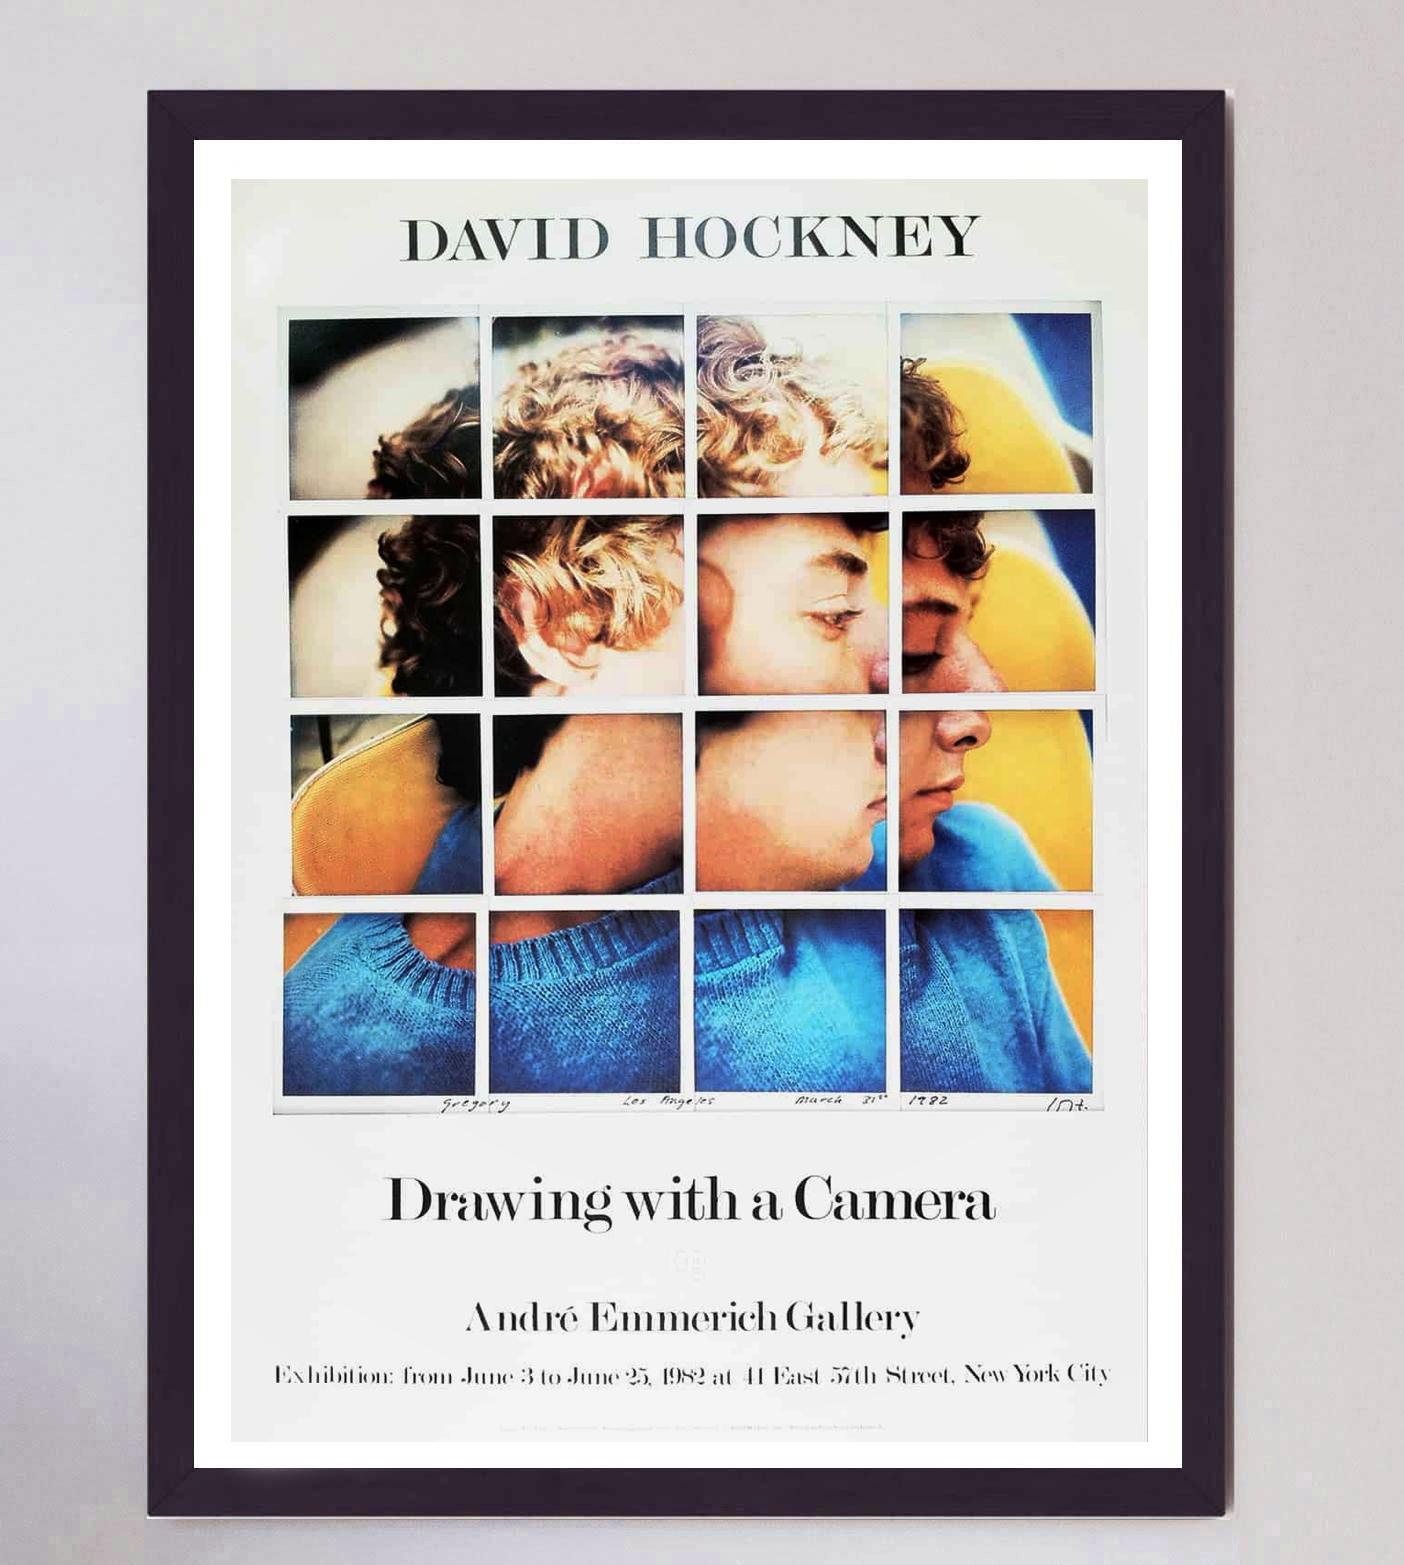 Paper David Hockney - Drawing With a Camera - Andre Emmerich Gallery Original Poster For Sale